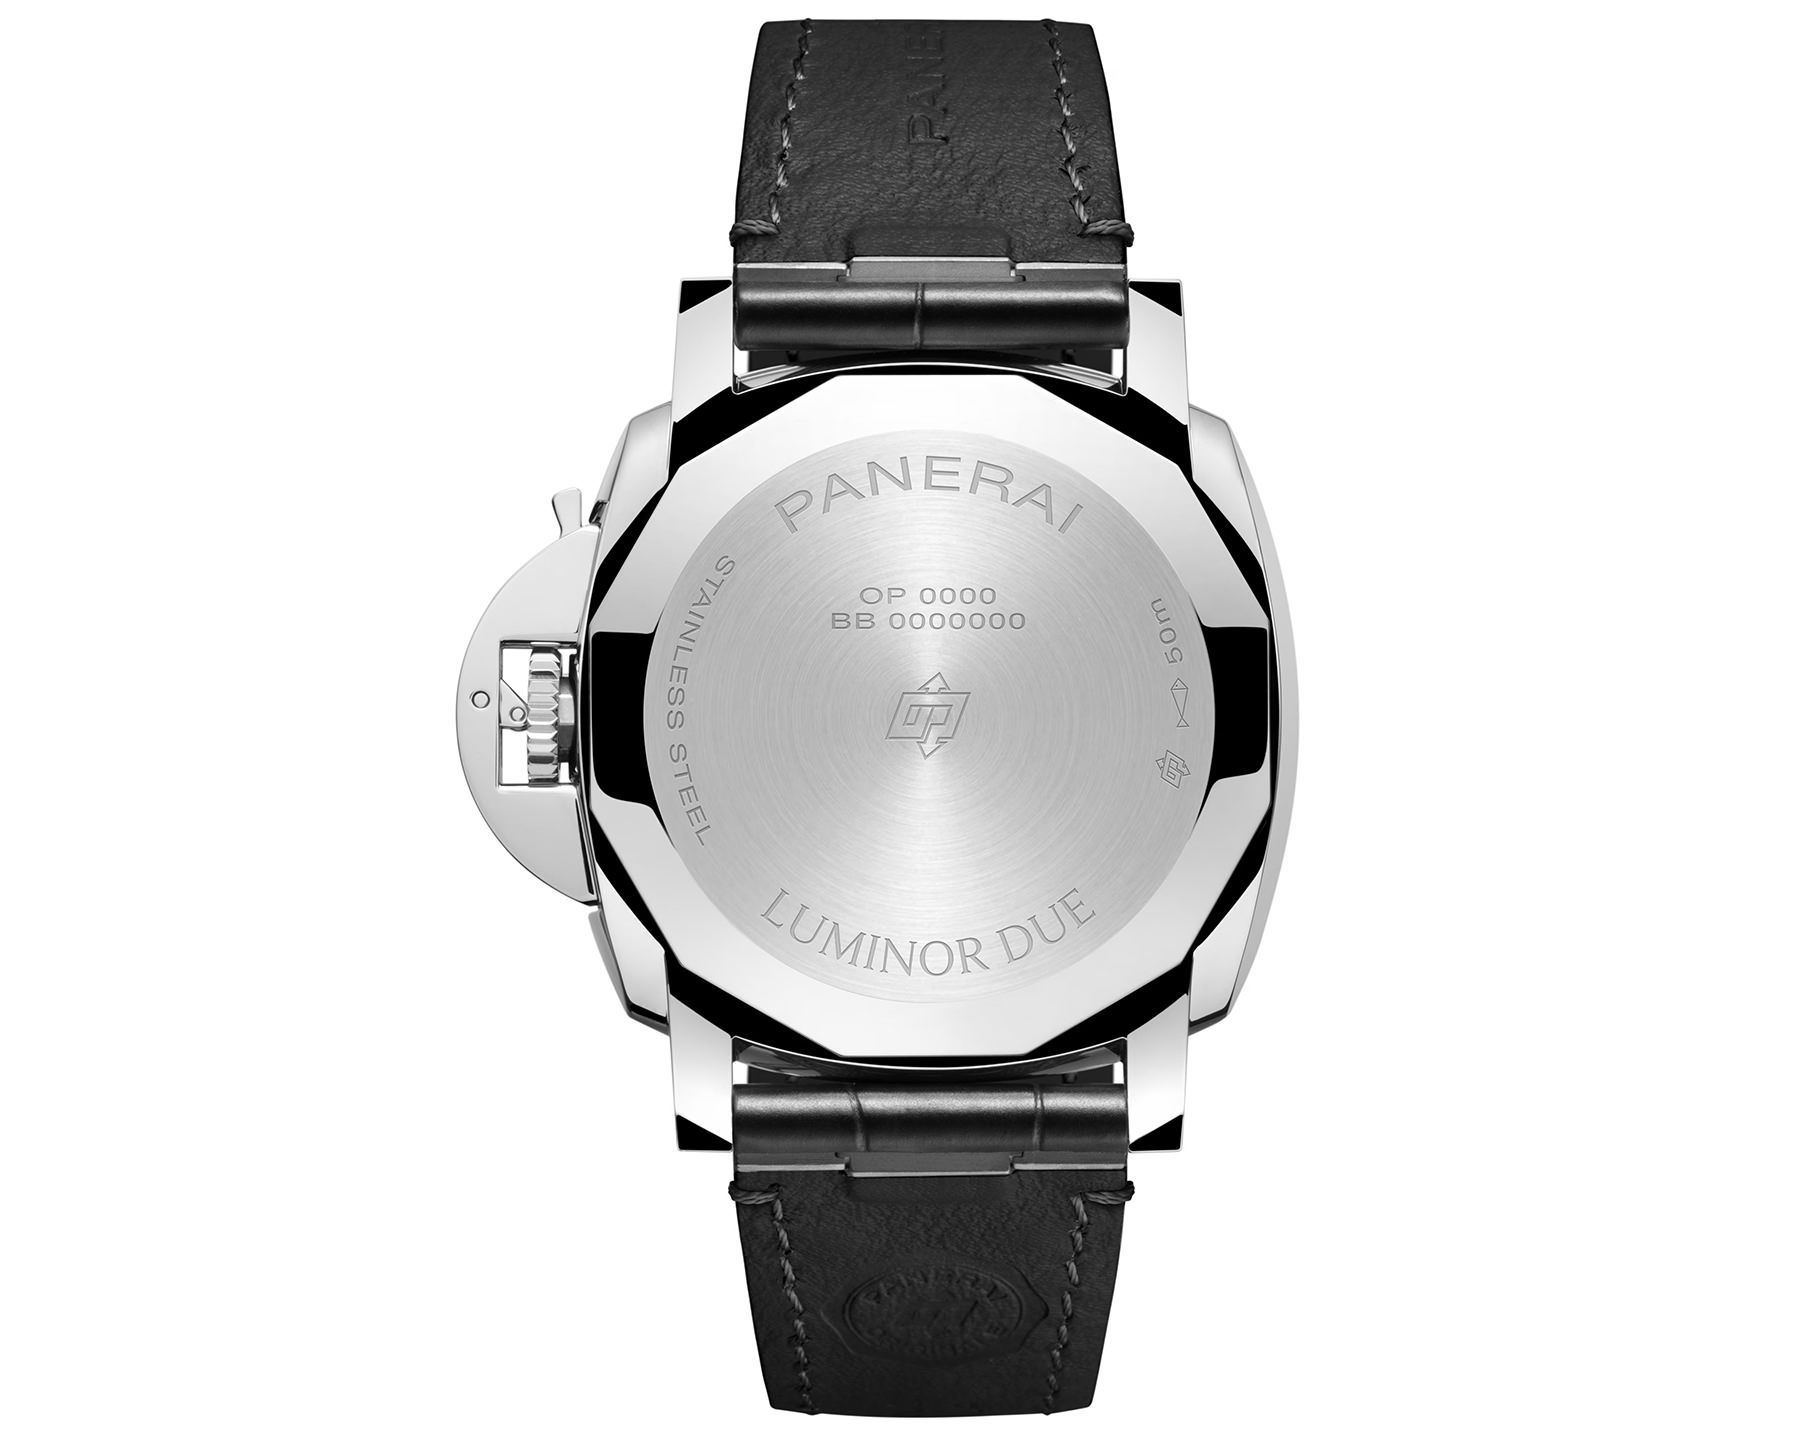 Panerai Luminor Due  White Dial 42 mm Automatic Watch For Men - 3